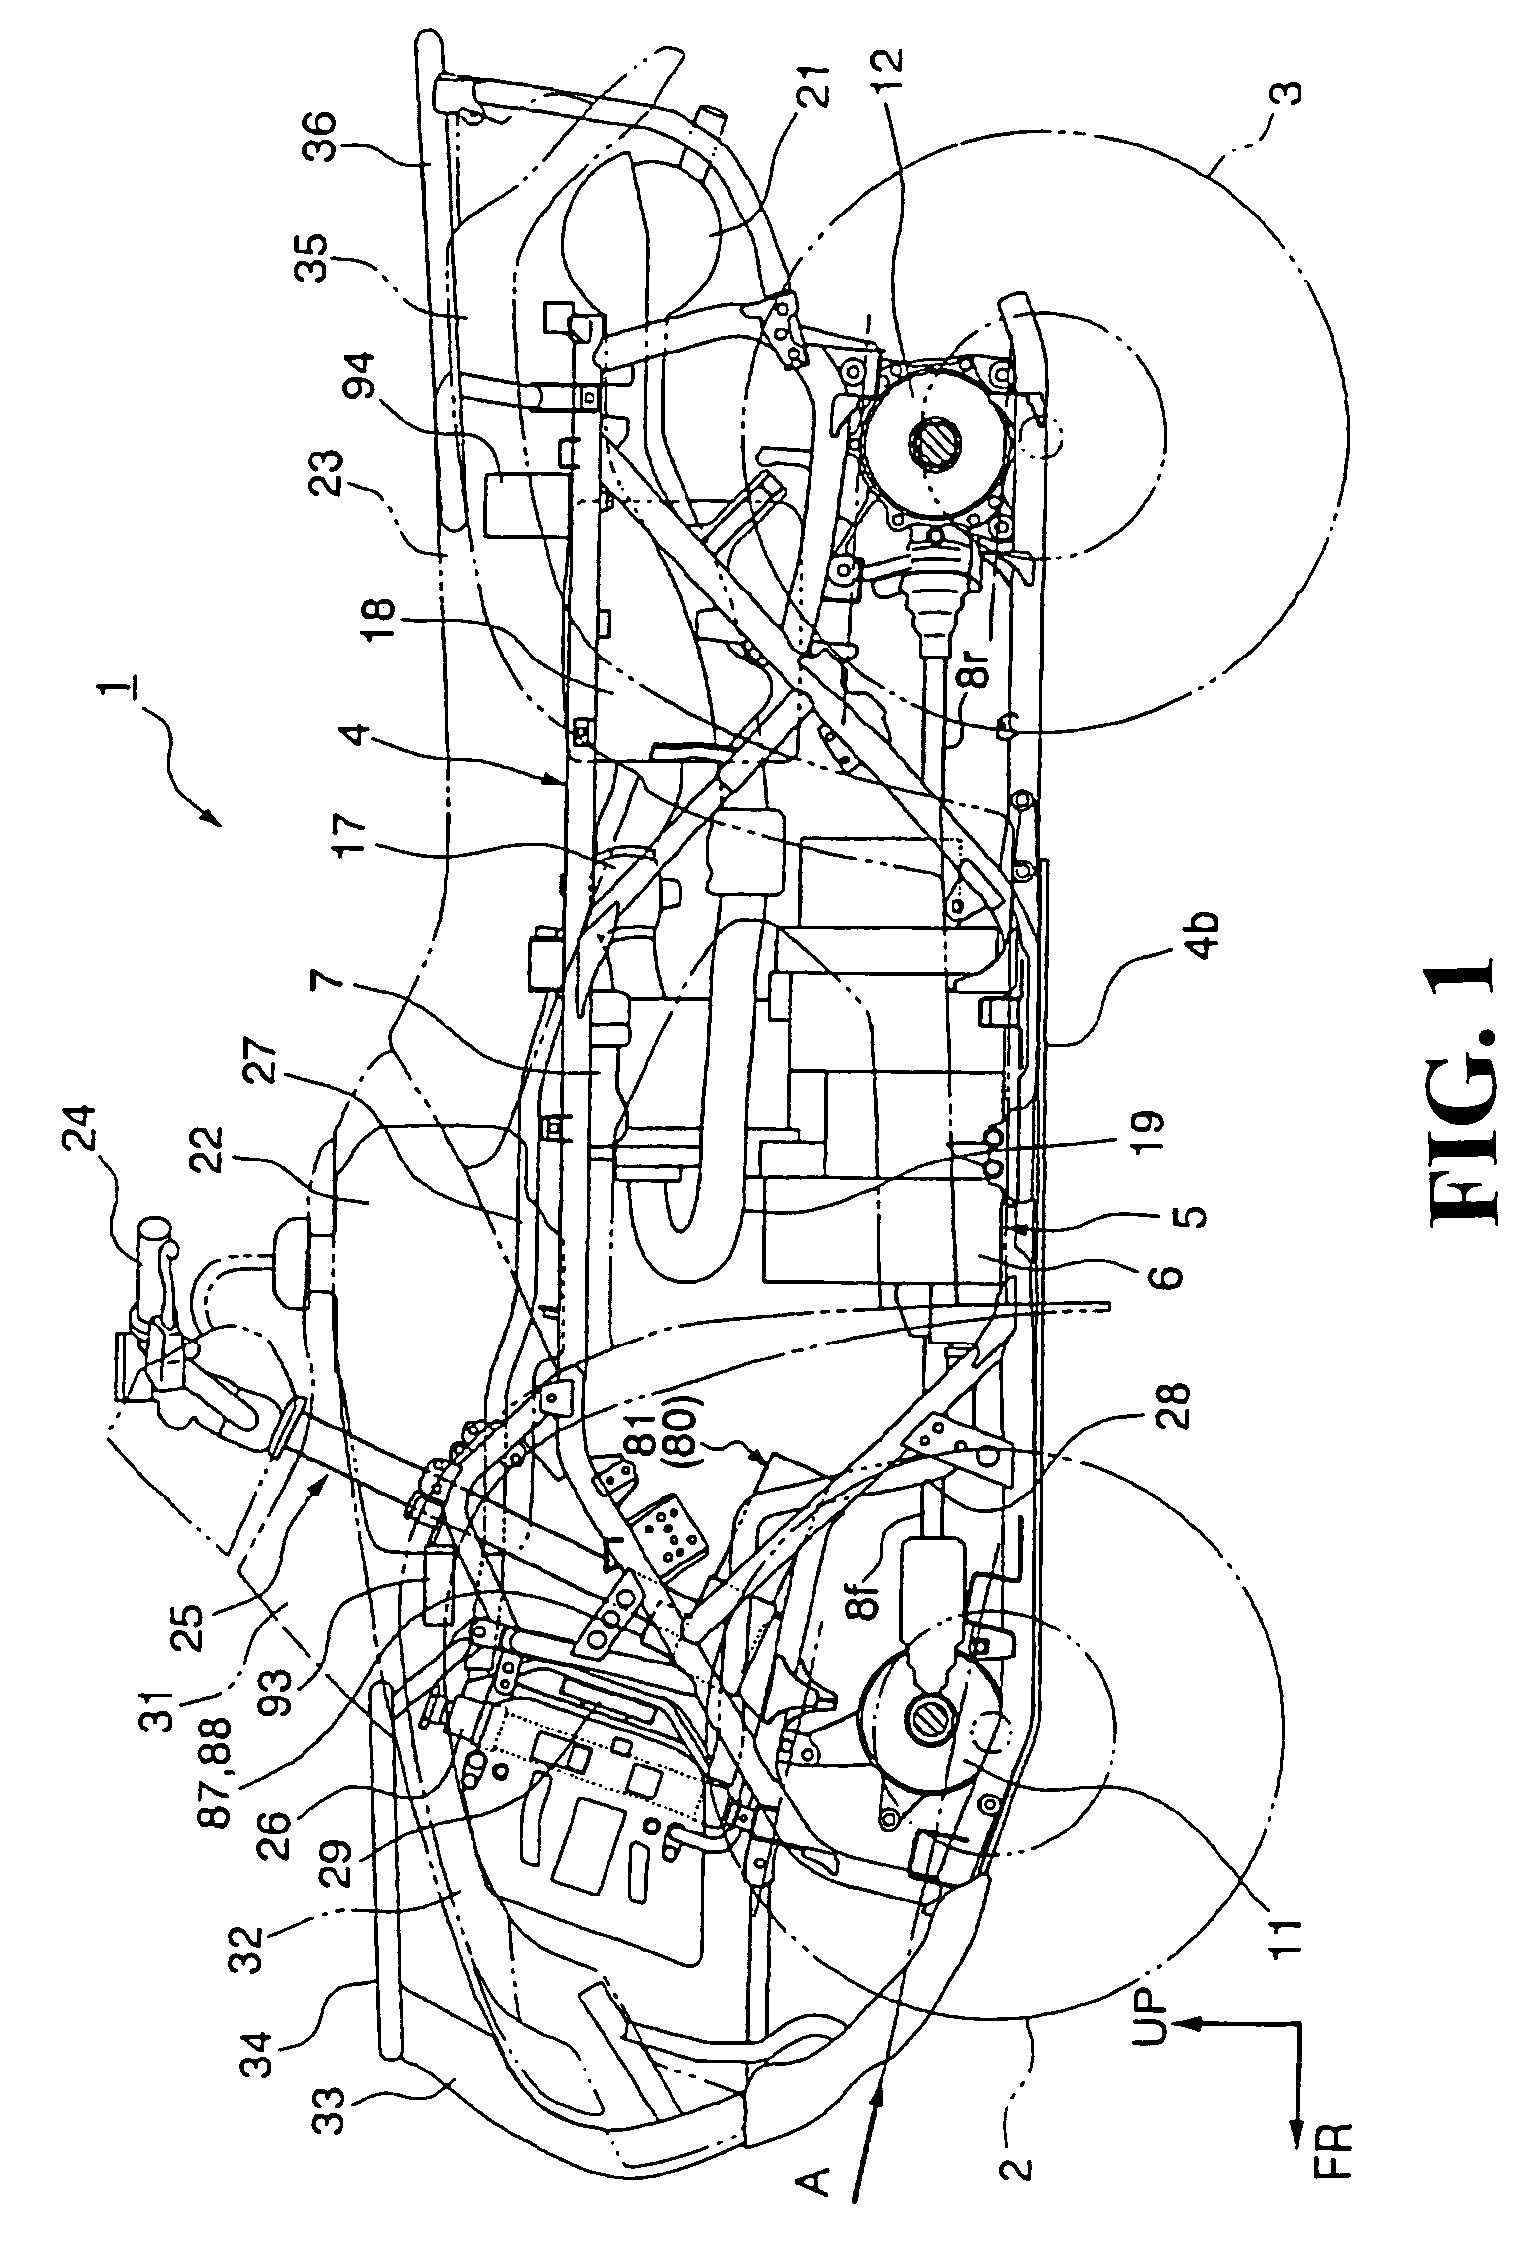 Power steering system for all-terrain buggy vehicle